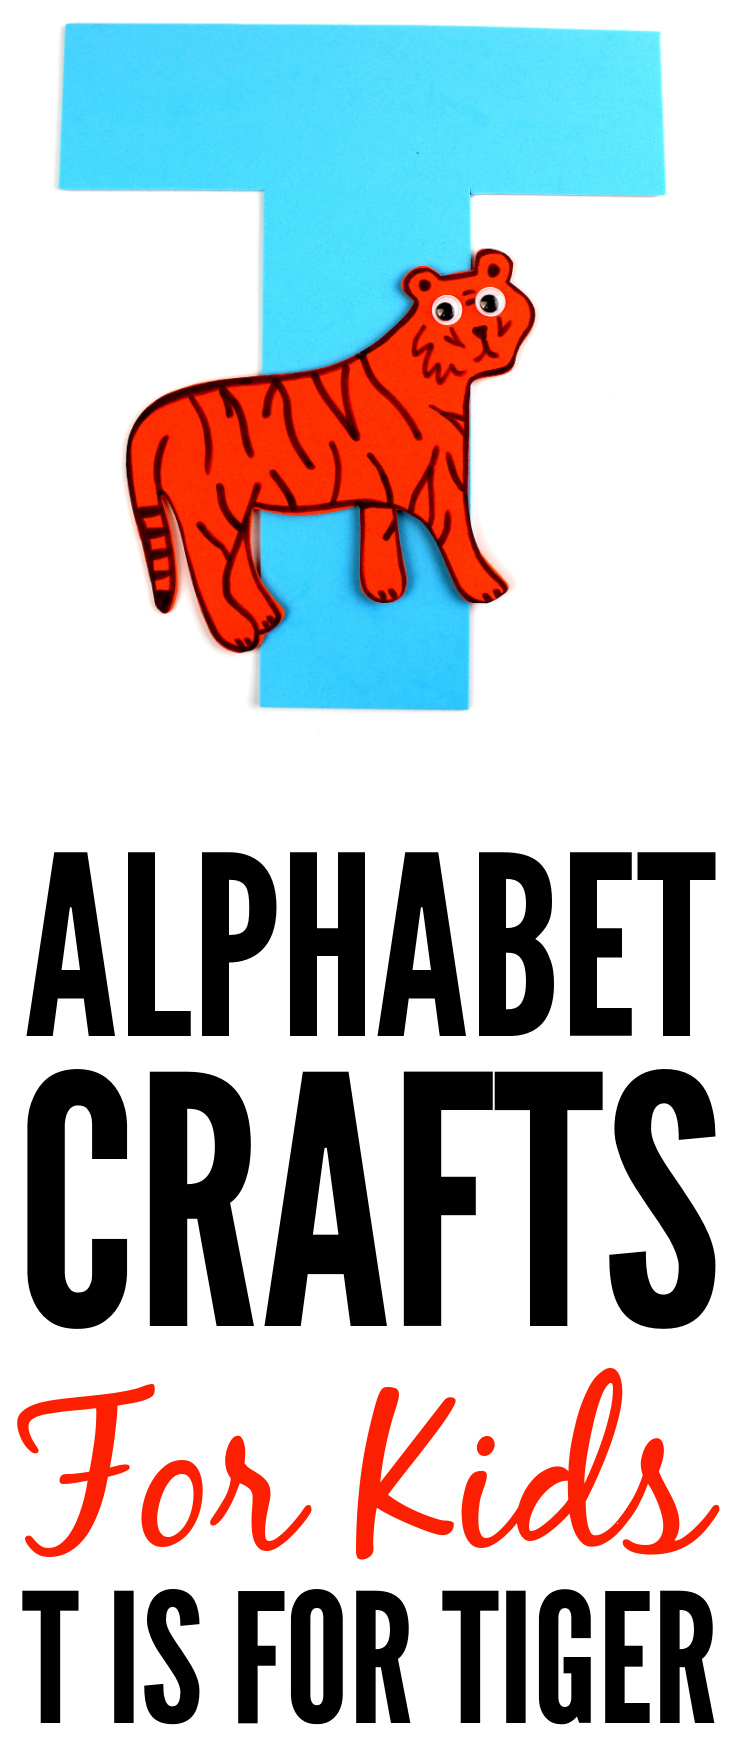 This week in my series of ABCs kids crafts featuring the Alphabet, we are doing a T is for Tiger craft. These Alphabet Crafts For Kids are a fun way to introduce your child to the alphabet.